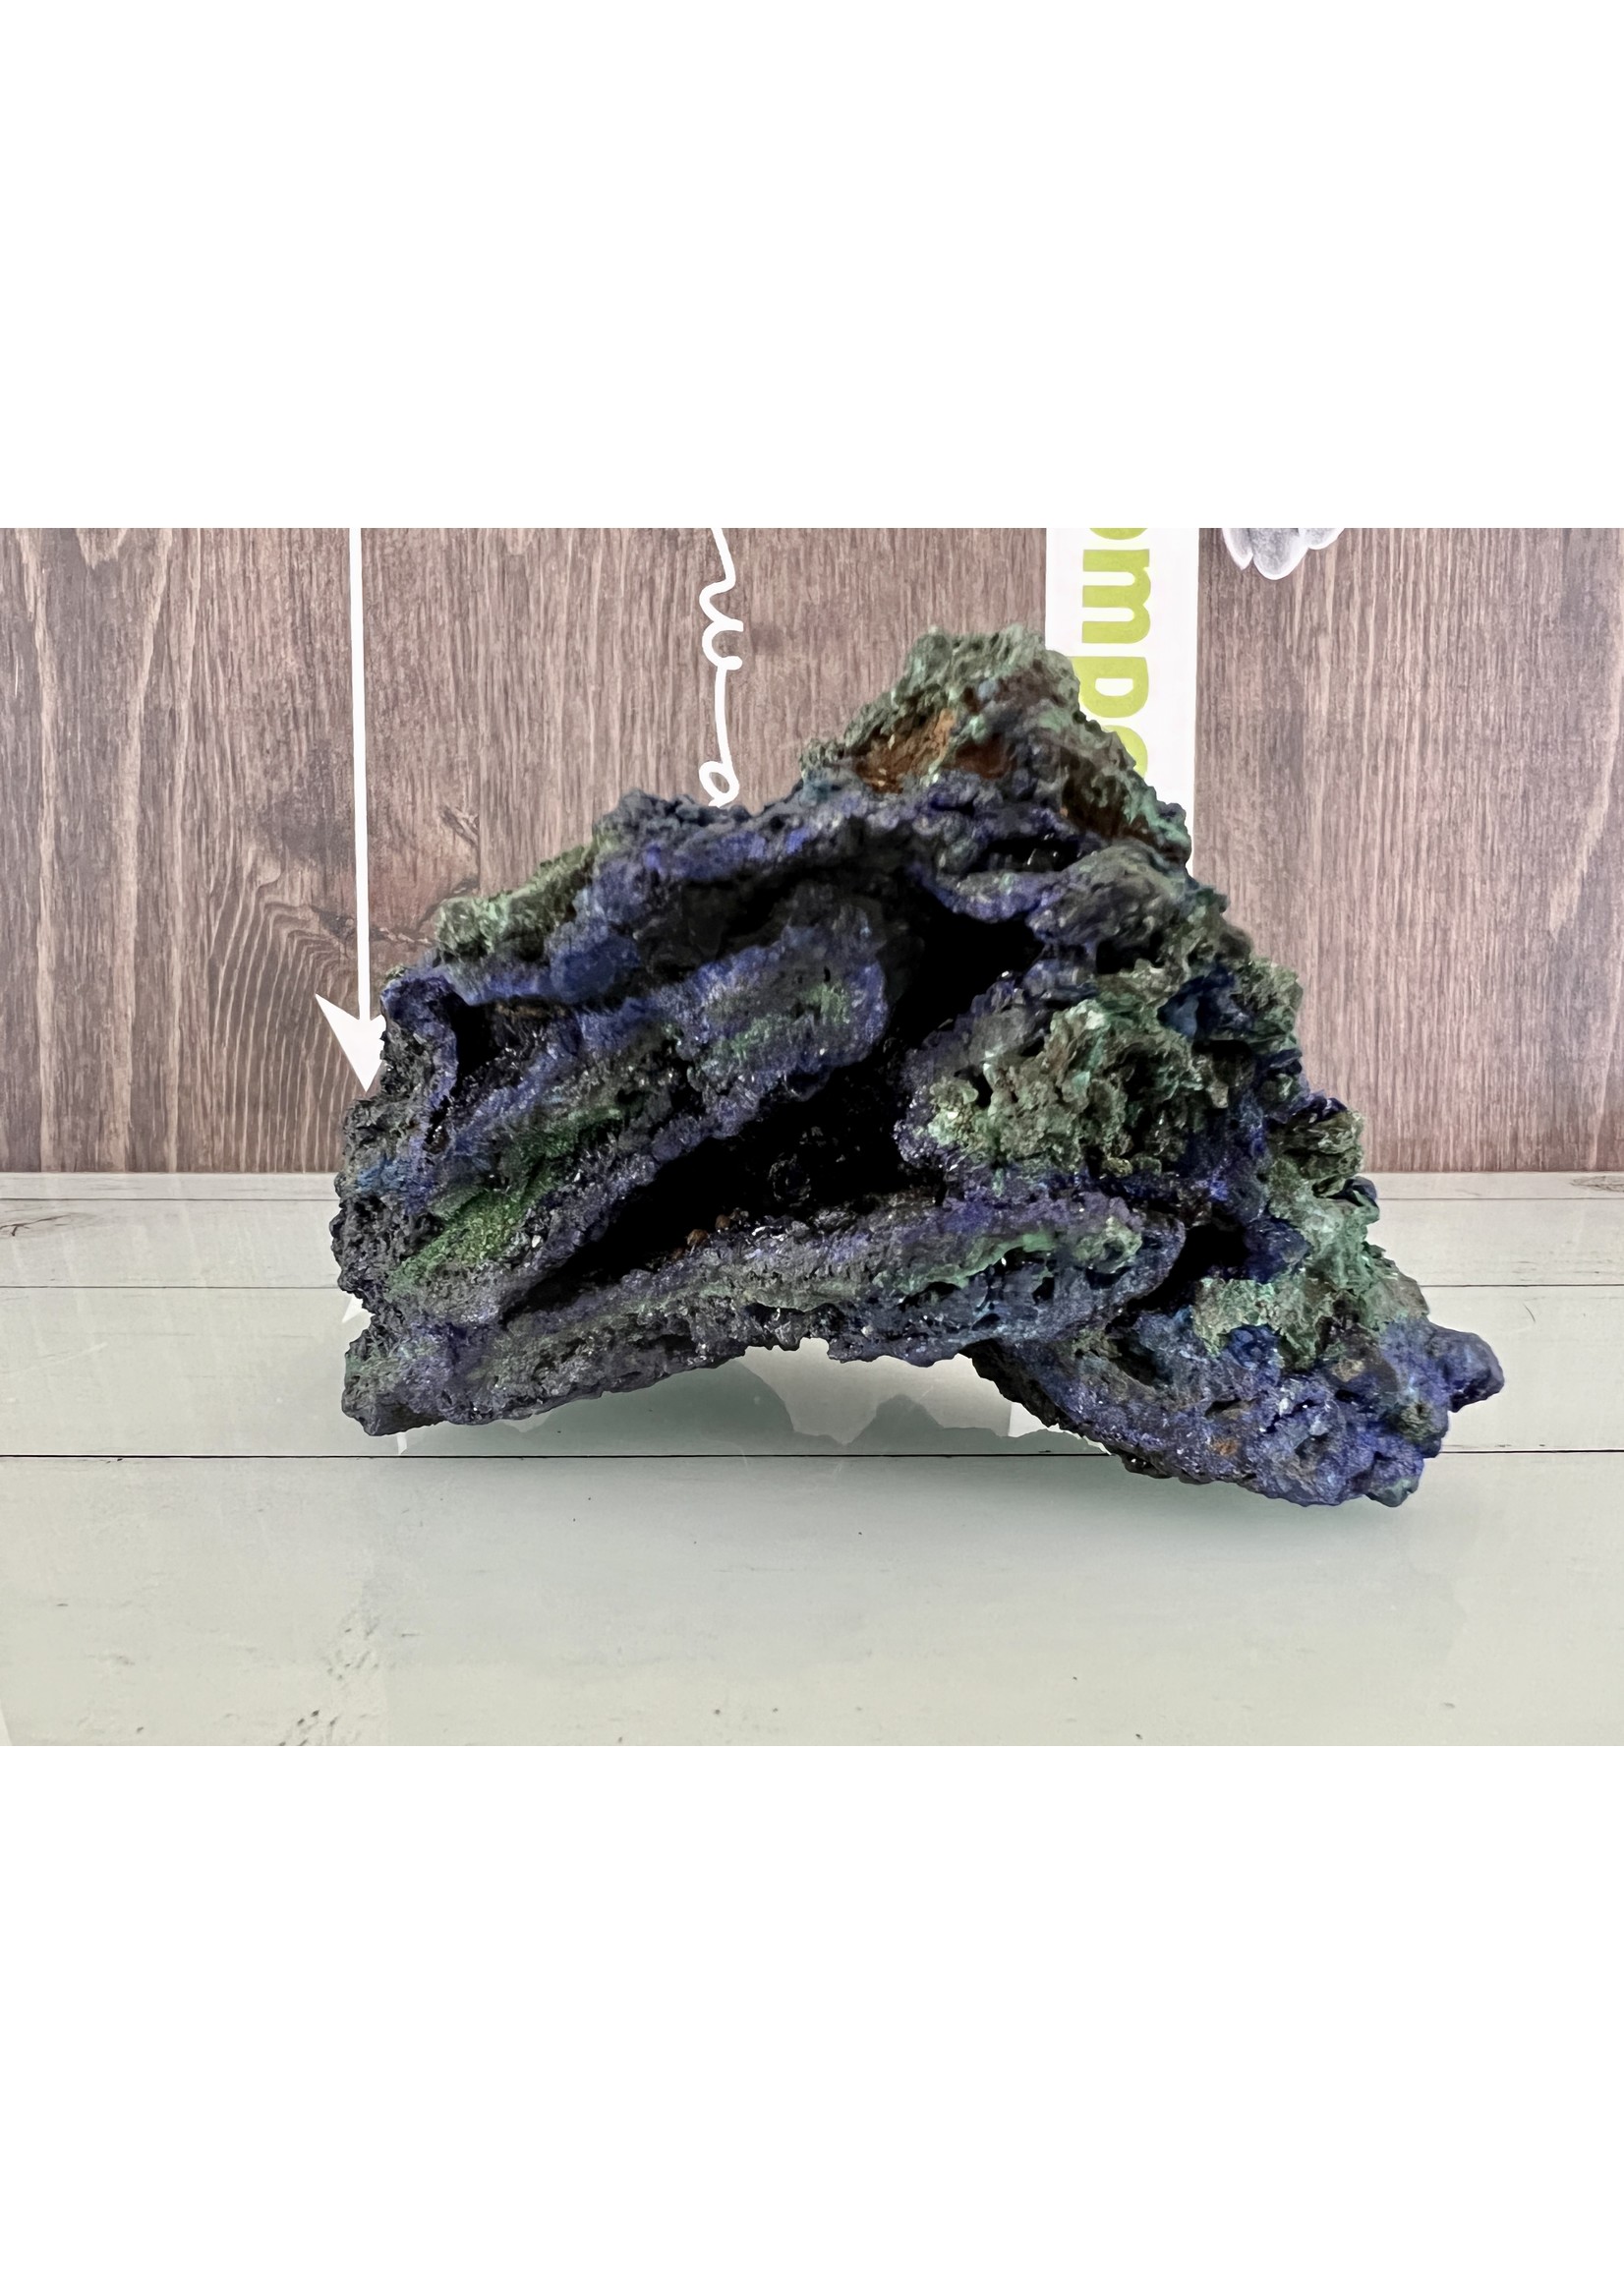 fantastic raw malachite azurite, helps release anger, aggression or unmanageable emotions